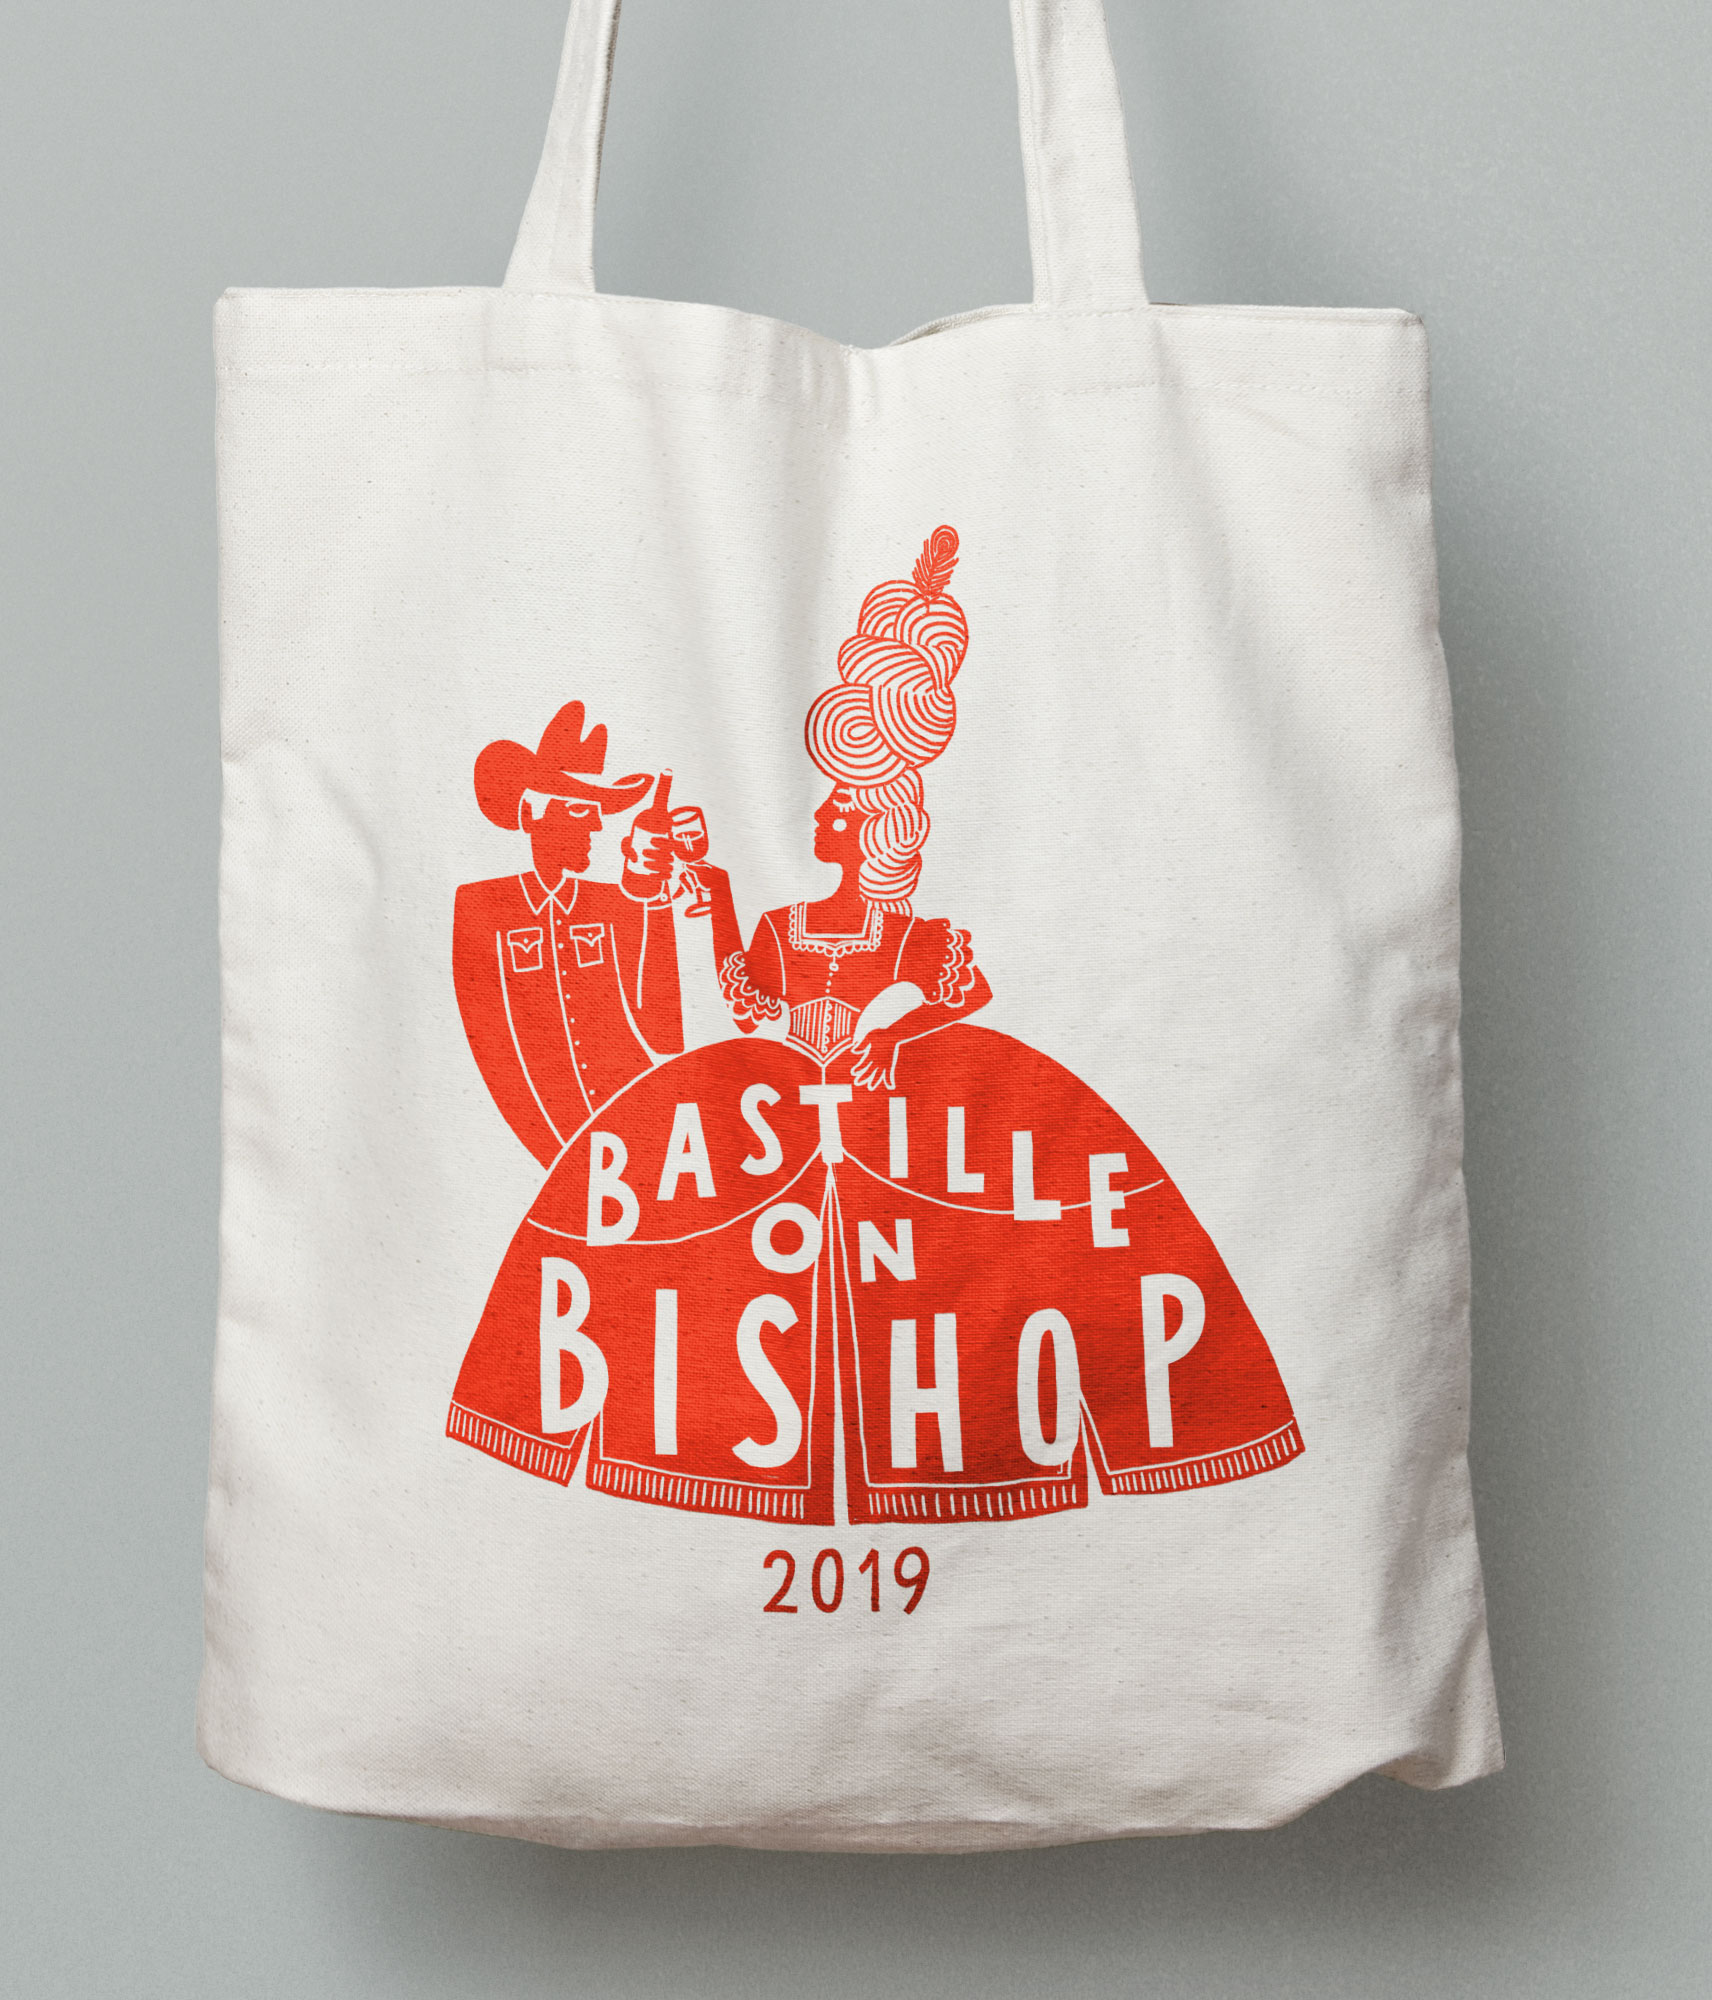 A white bag with the words bastille on bishop 2 0 1 9